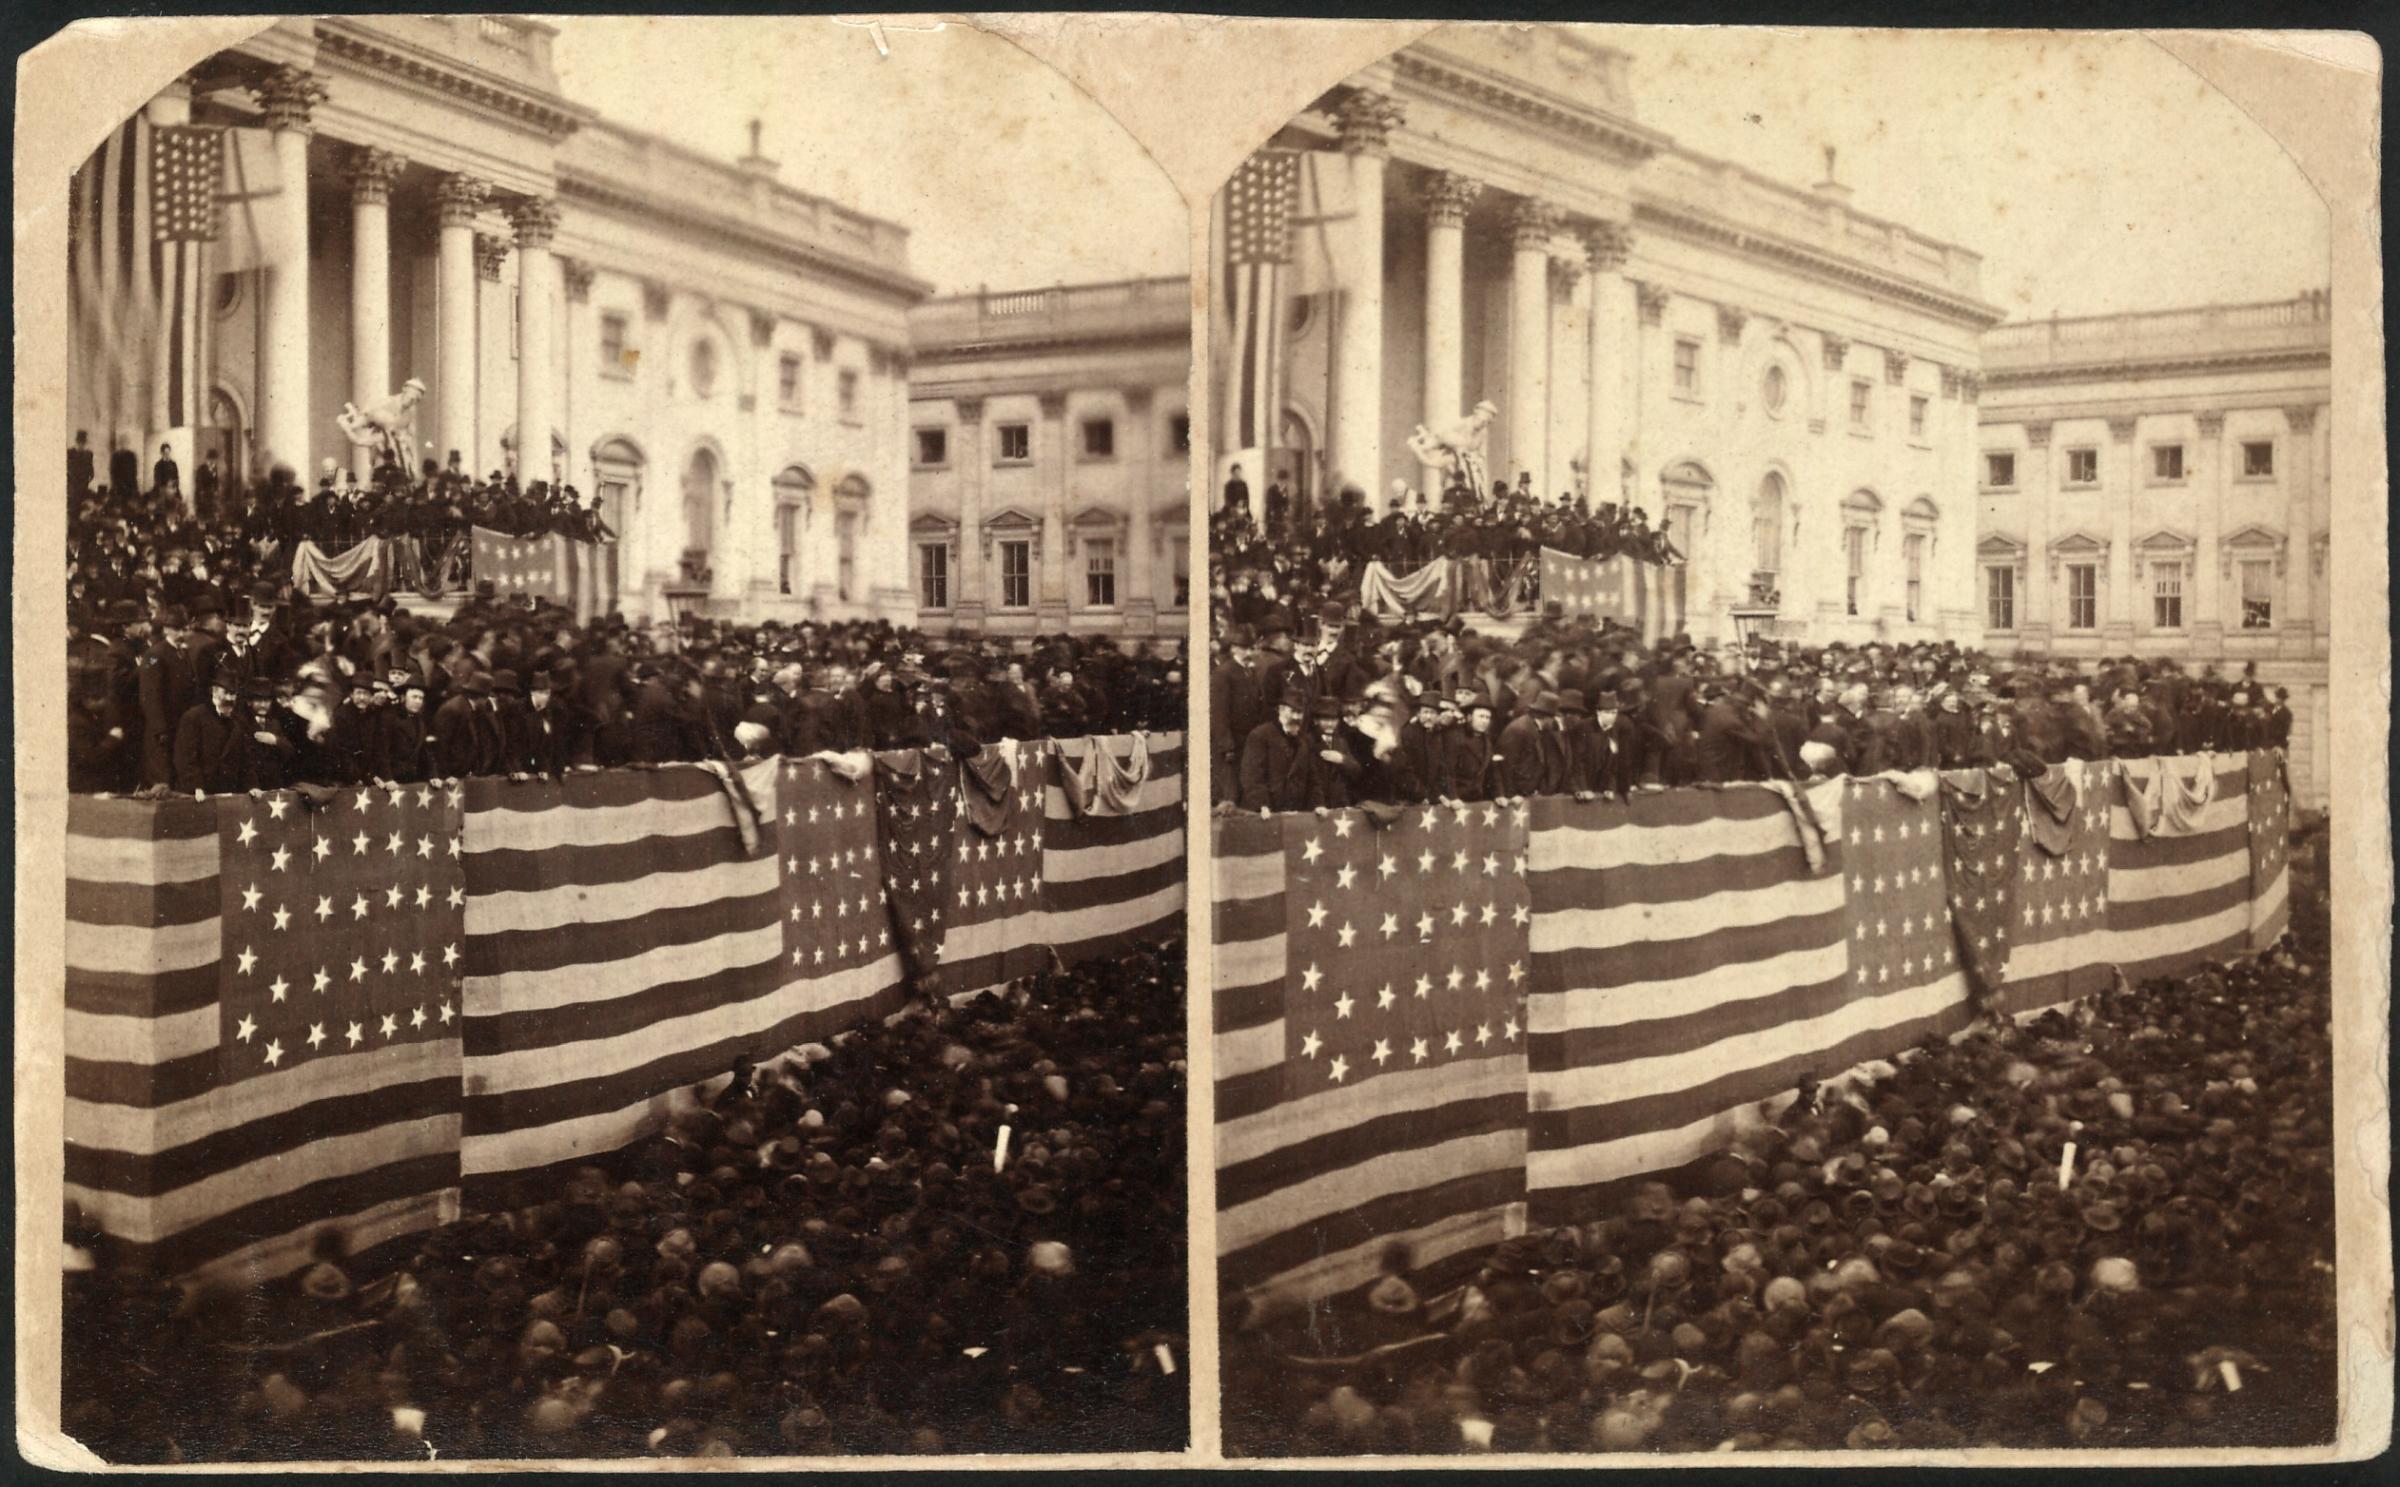 Chief Justice Morrison R. Waite administering the oath of office to Rutherford B. Hayes on a flag-draped inaugural stand on the east portico of the U.S. Capitol, 1877.